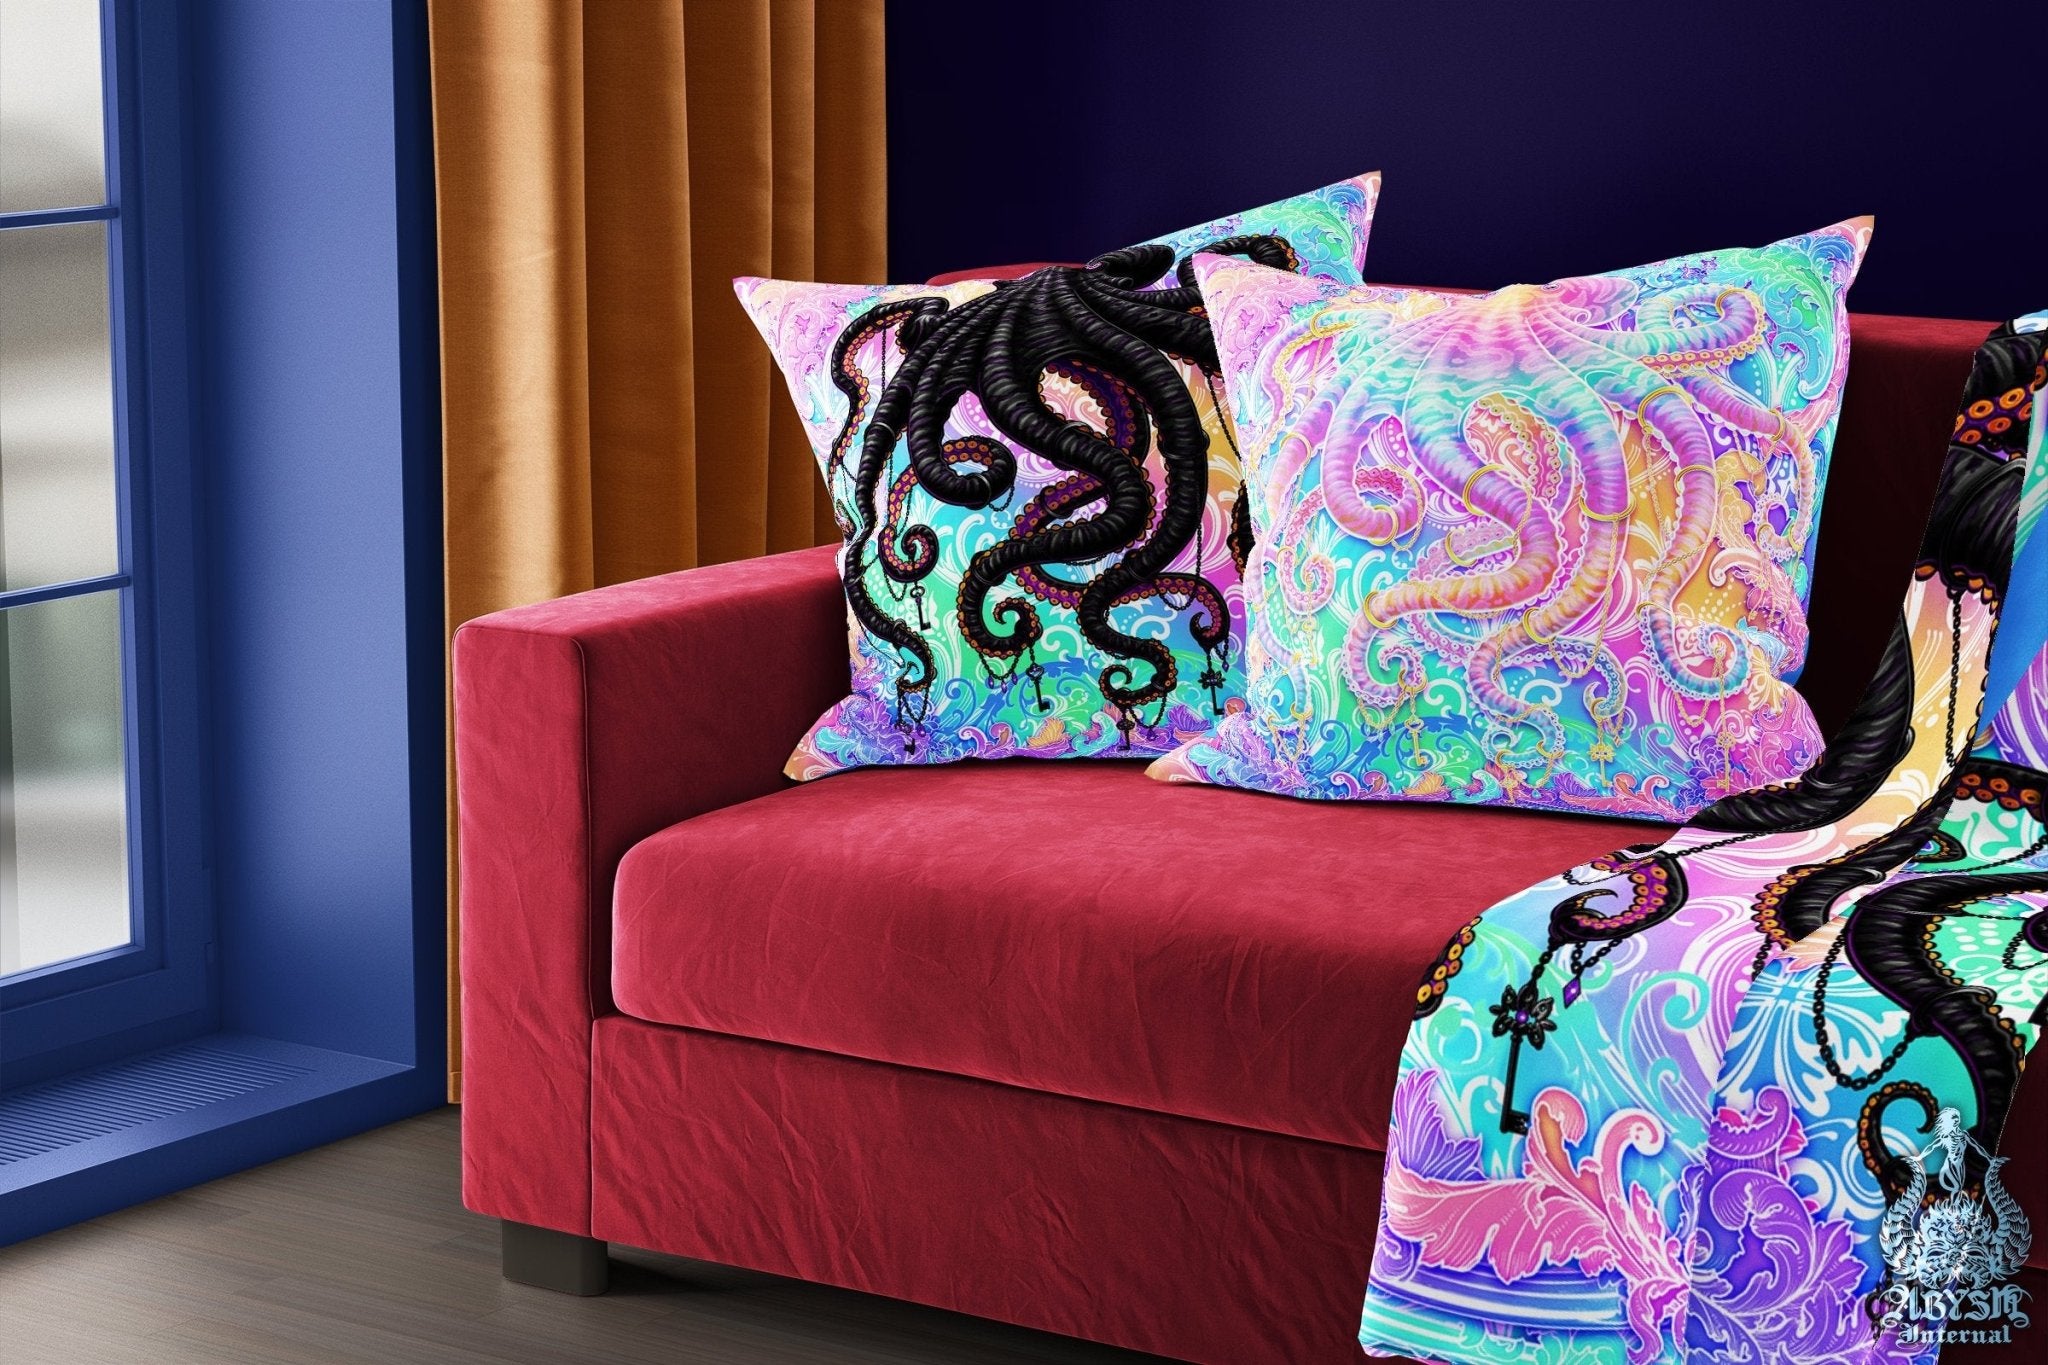 Psychedelic Throw Pillow, Decorative Accent Cushion, Psychedelic Room Decor, Eclectic, Funky Home - Pastel Punk Black Octopus - Abysm Internal